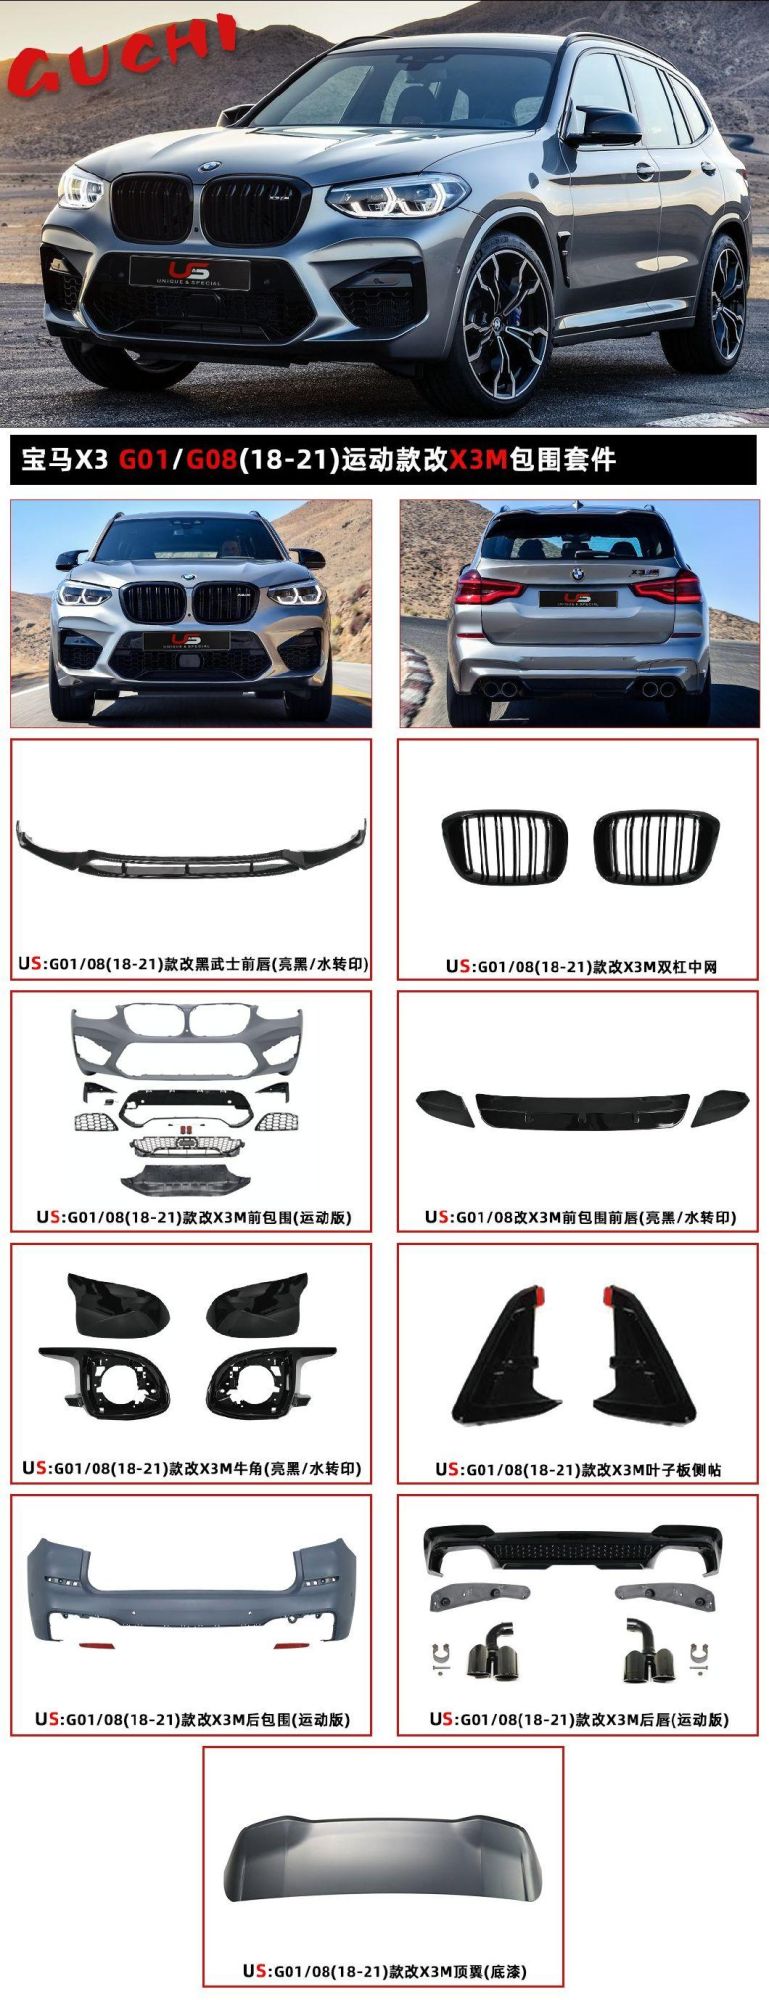 2018-2021 M Front Bumper with Grill for BMW X3 G01 X4 G02 Facelift BMW M Style Body Kit Car Bumper for BMW X3 X4 2018 2019 2020